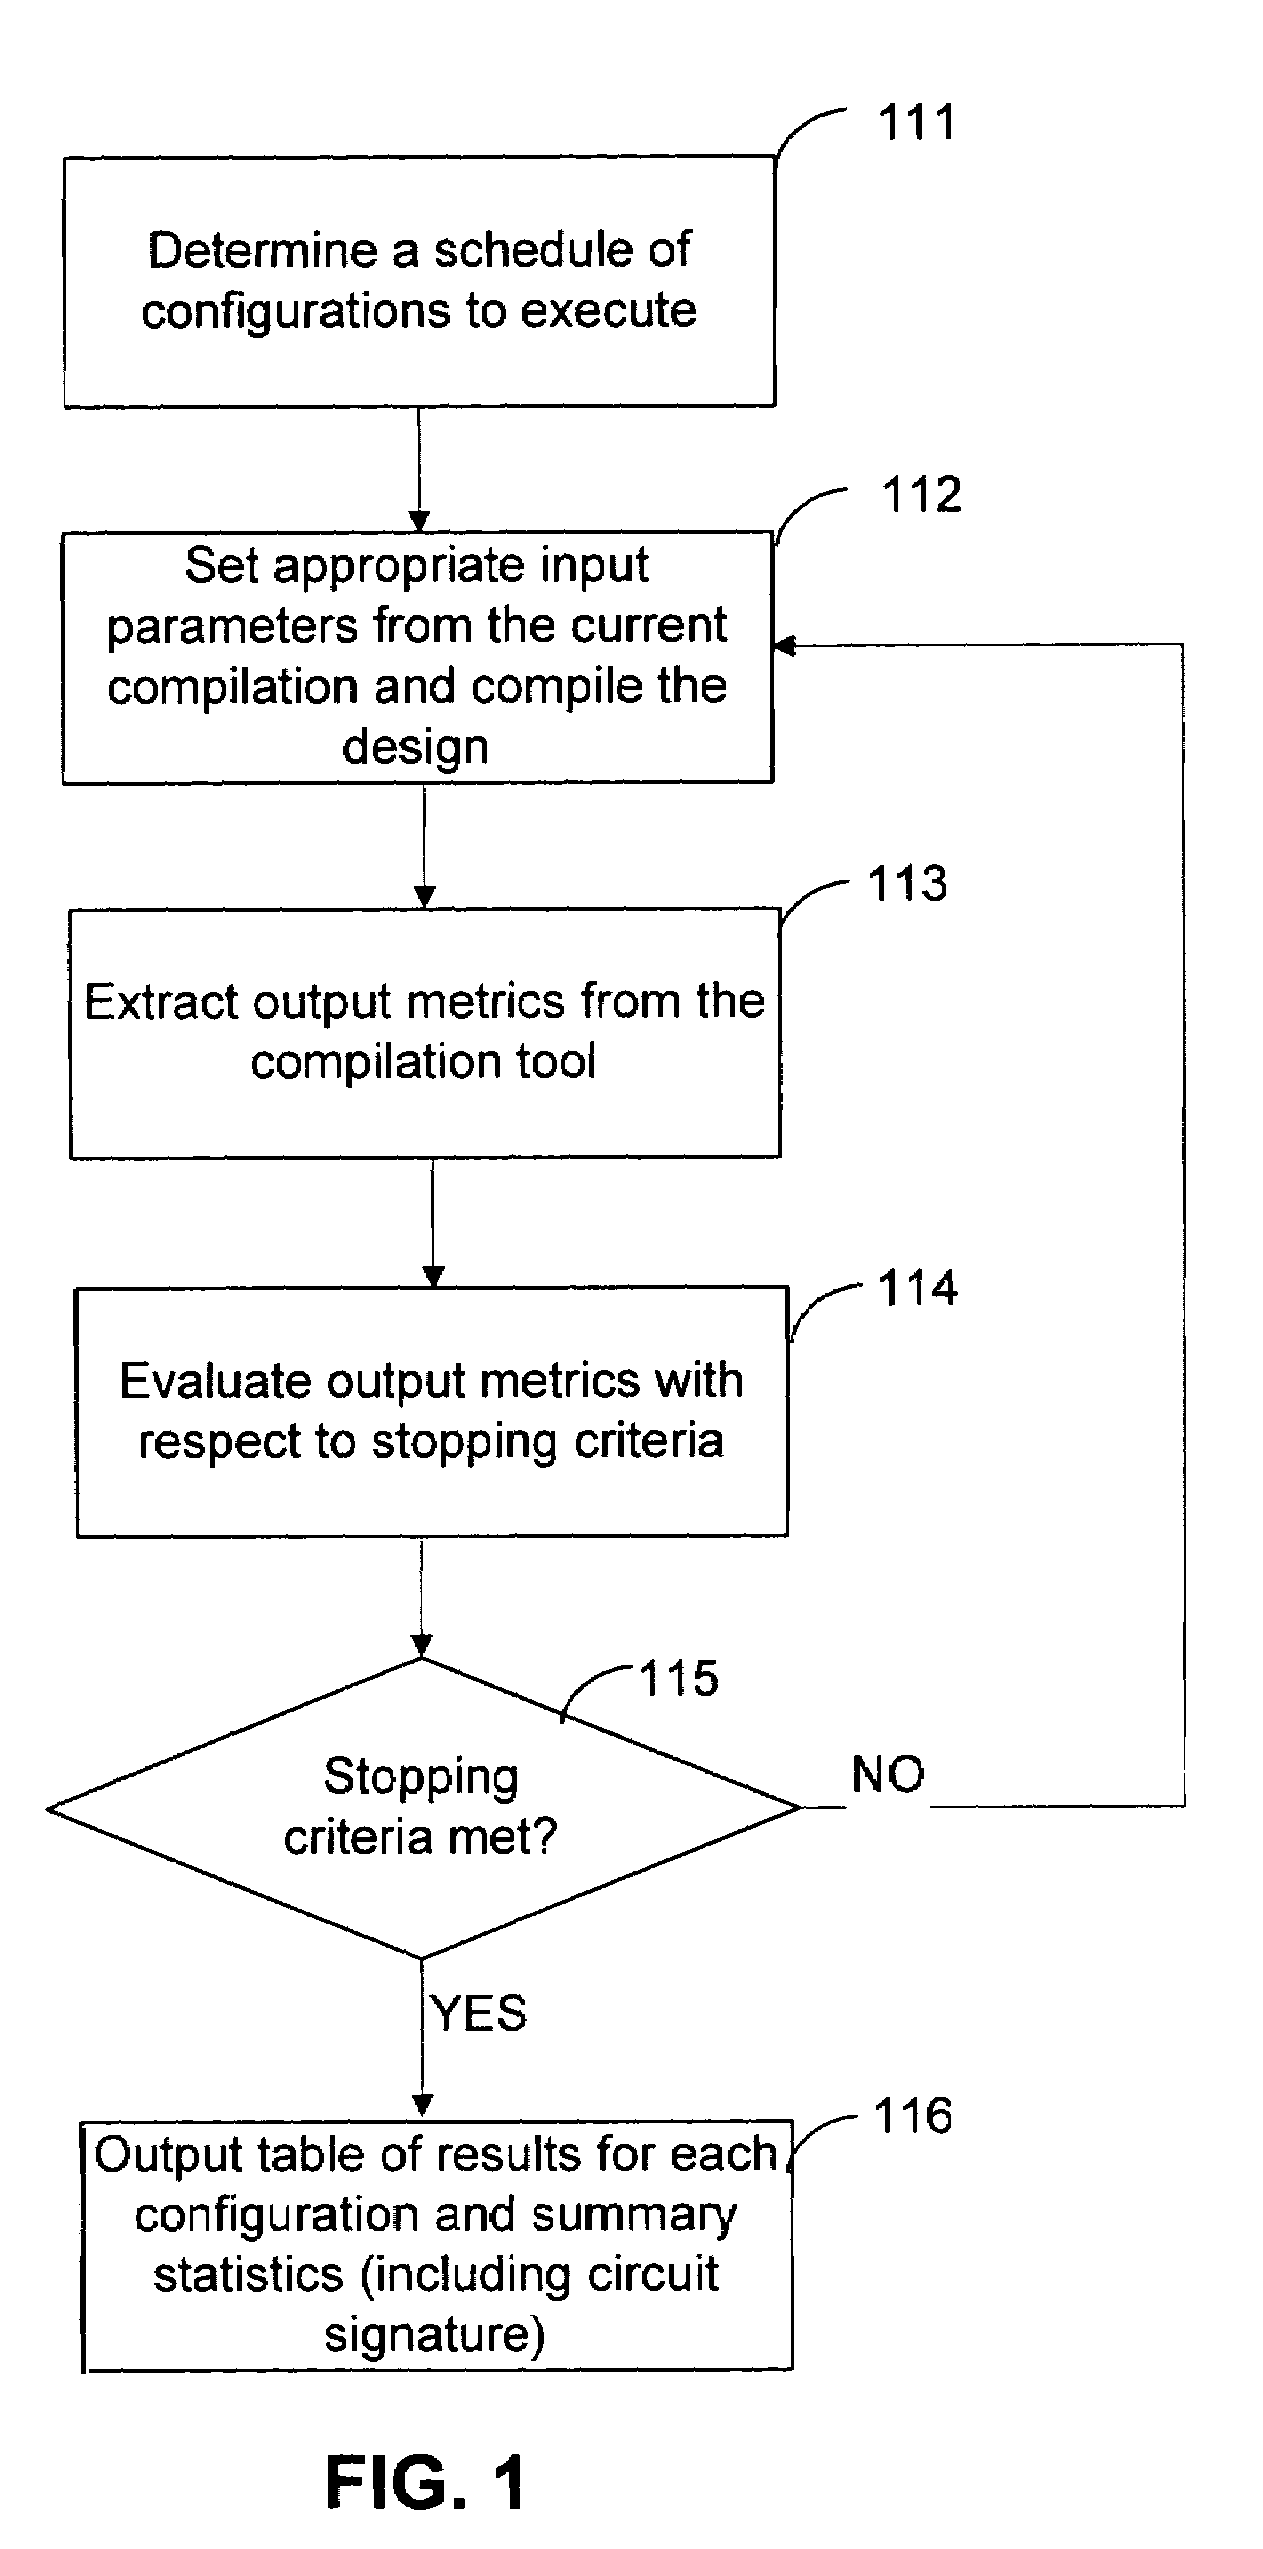 Techniques for automated sweeping of parameters in computer-aided design to achieve optimum performance and resource usage